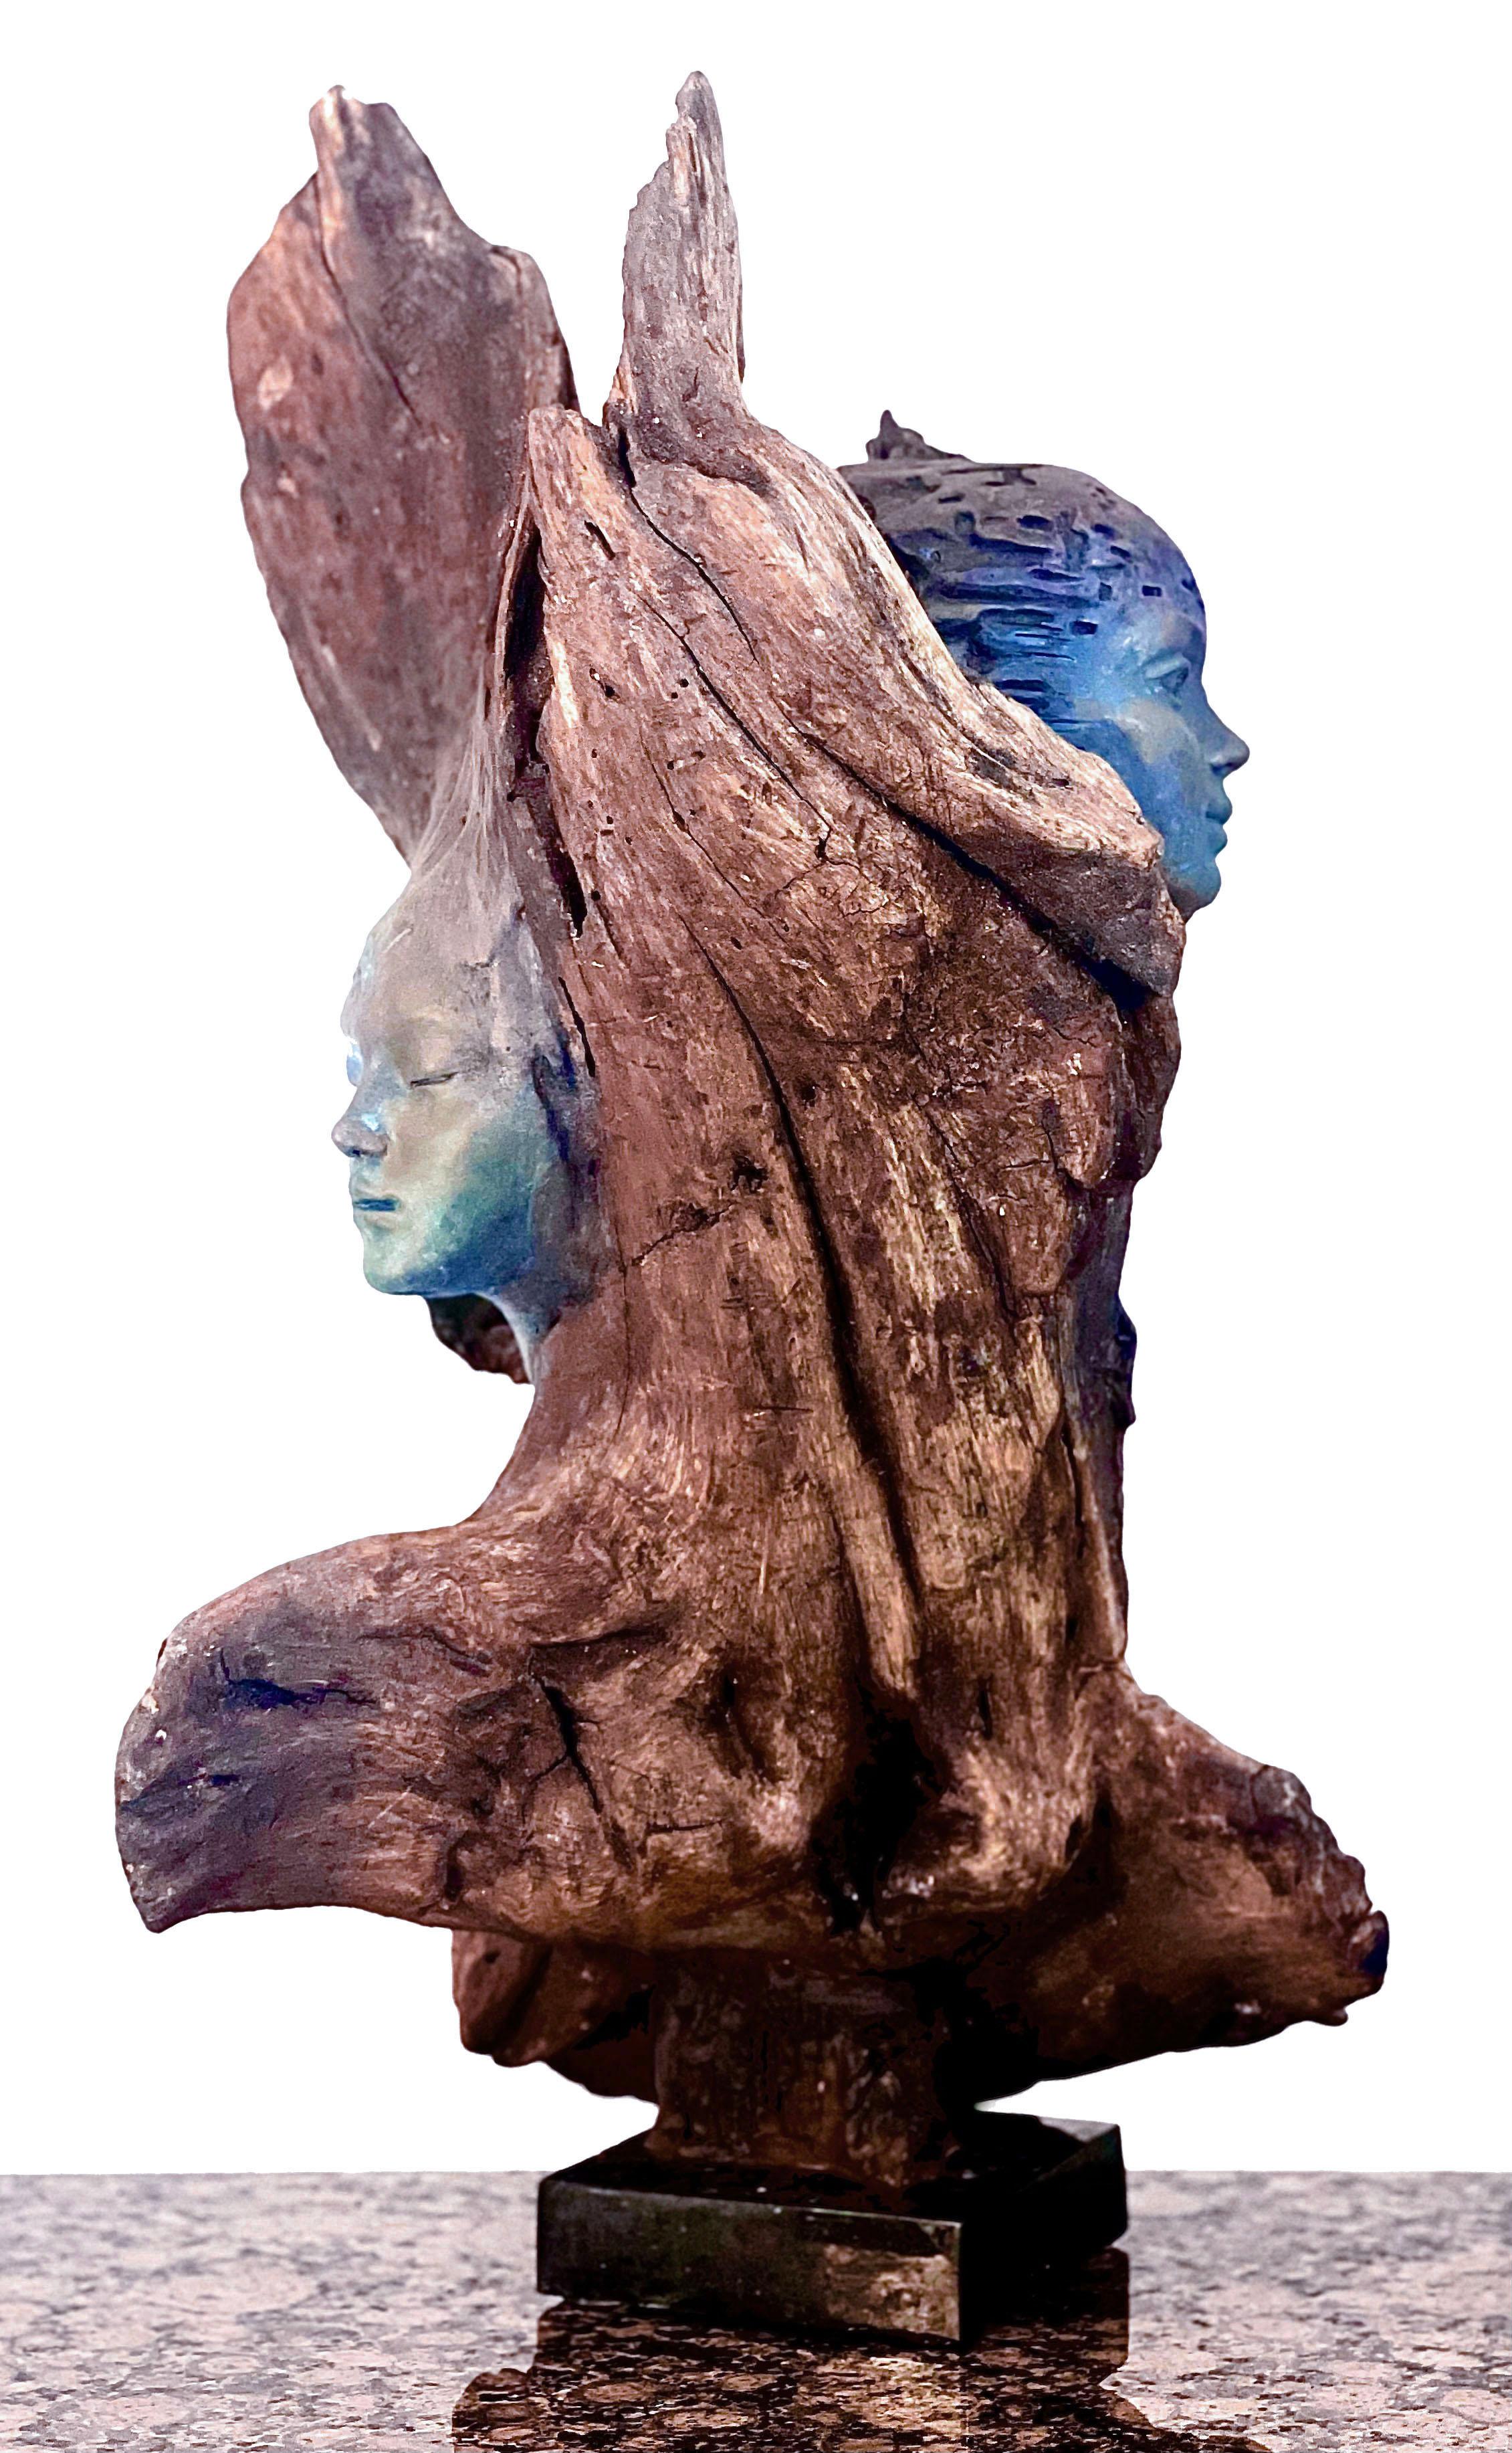 Contineo by Evgeni Vodenitcharov is an original wood sculpture was created in 2021 was inspired by the connection between humans and nature, manifesting the existential despair and emotions that this connection creates. Attempting to create from a